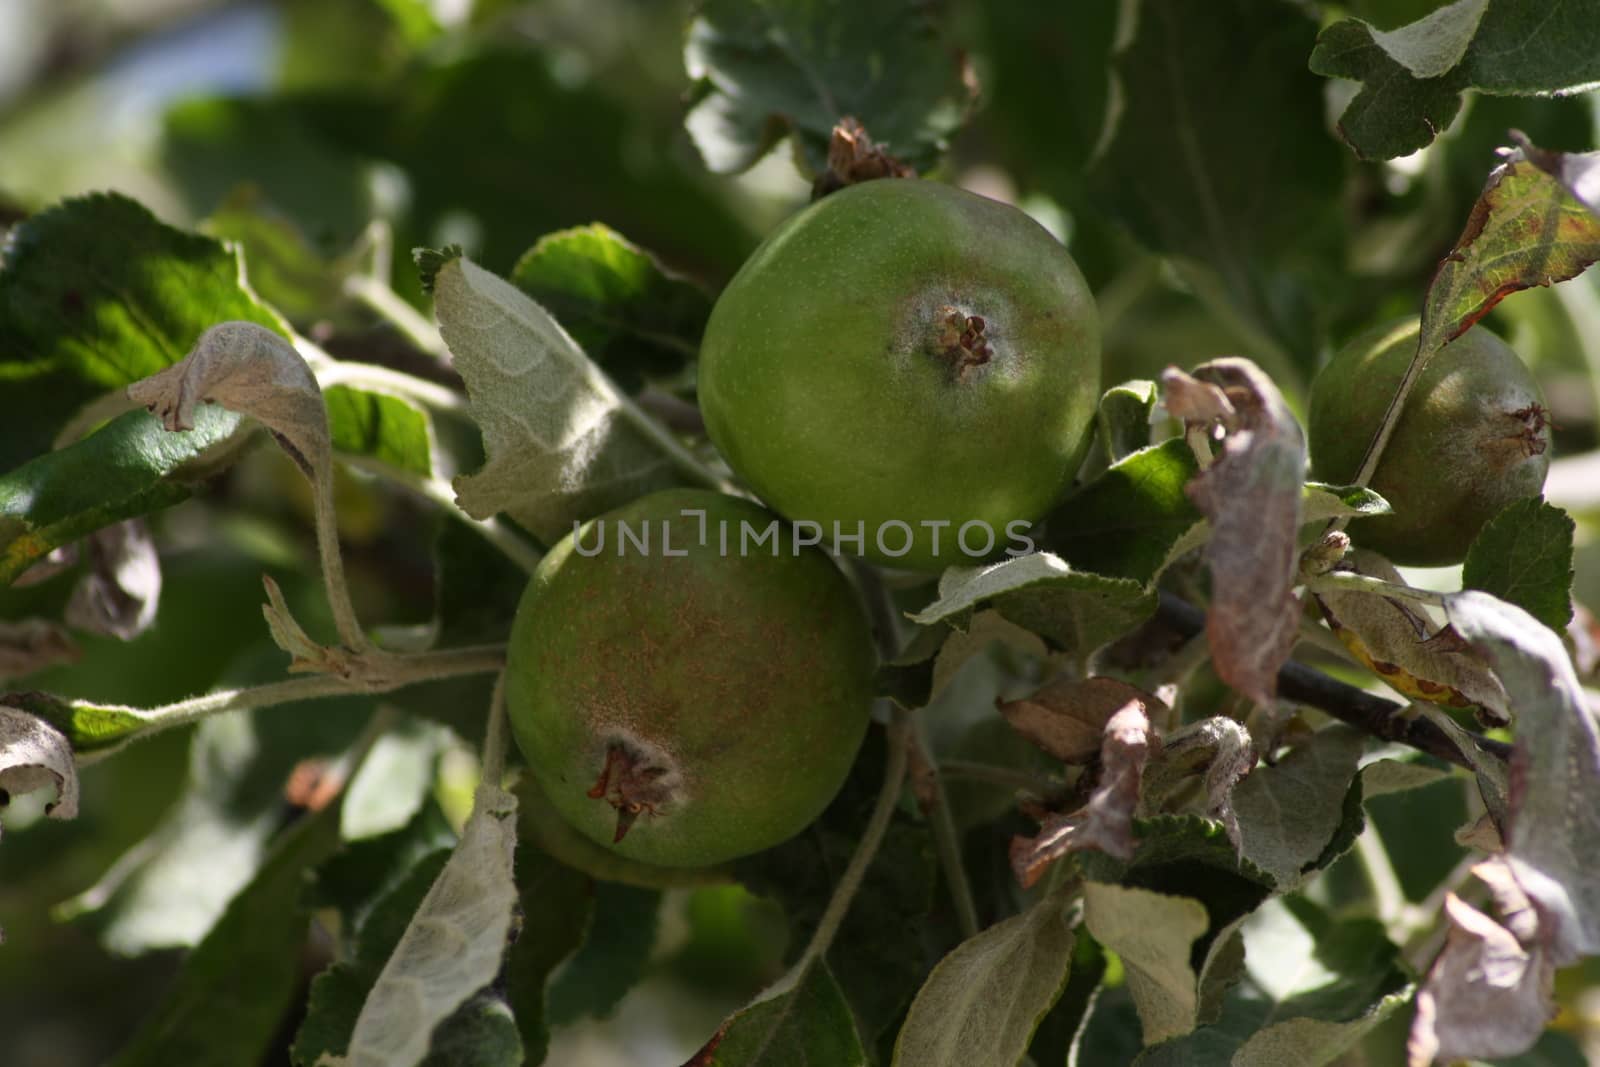 A close up of a fruit hanging from a branch. High quality photo